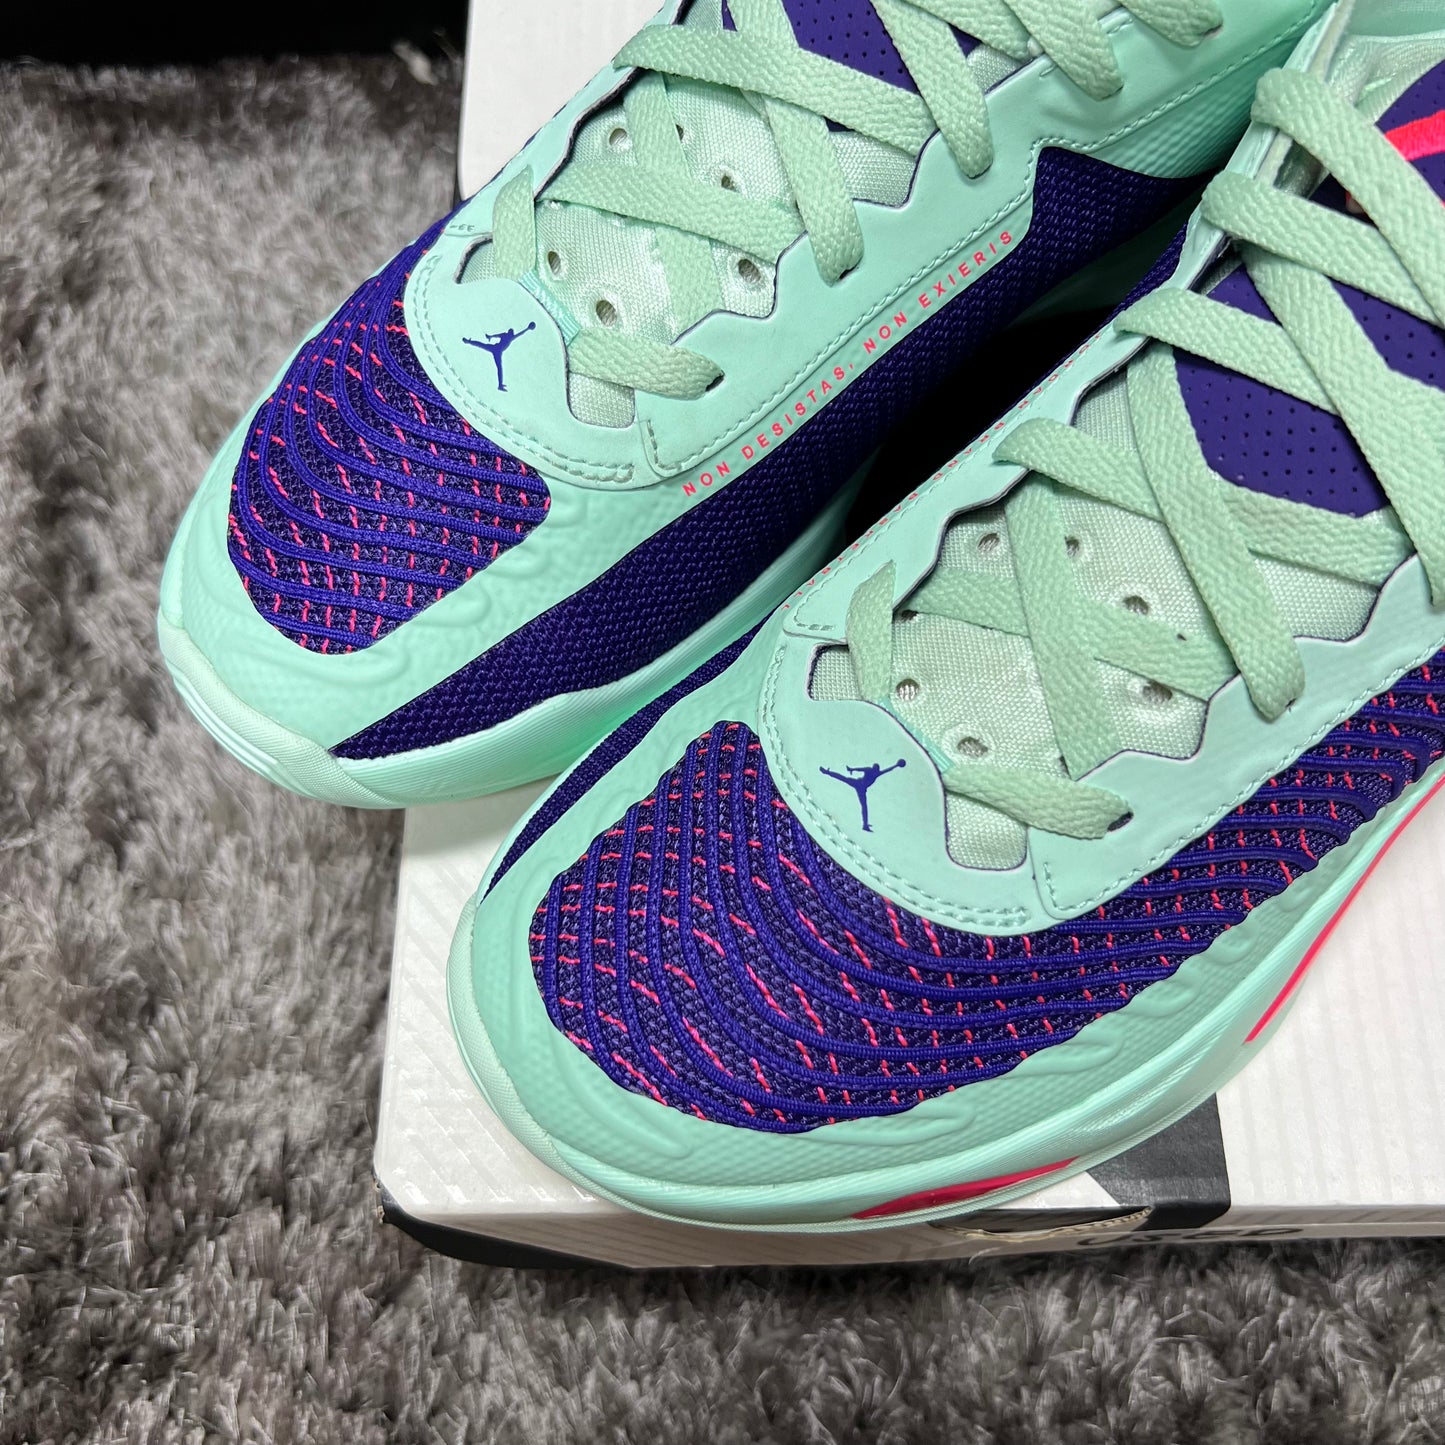 Luka 1 Easter size 9.5 used